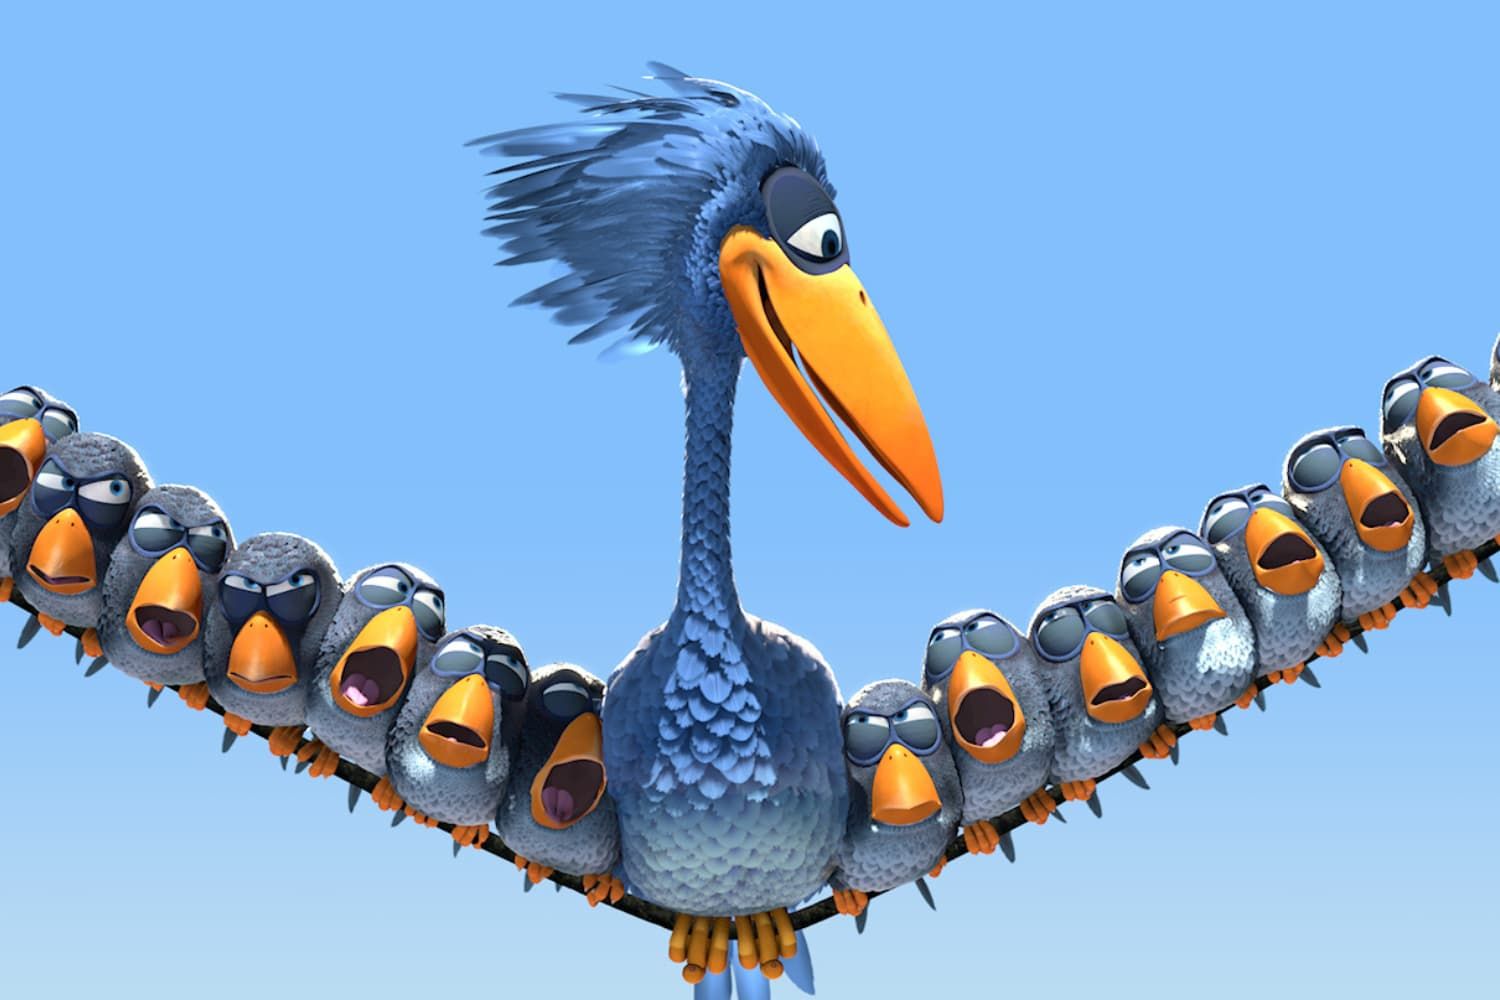 For%20the%20birds%20animation%20video%20Pixar-7d81b3b5 Father / Father's Day